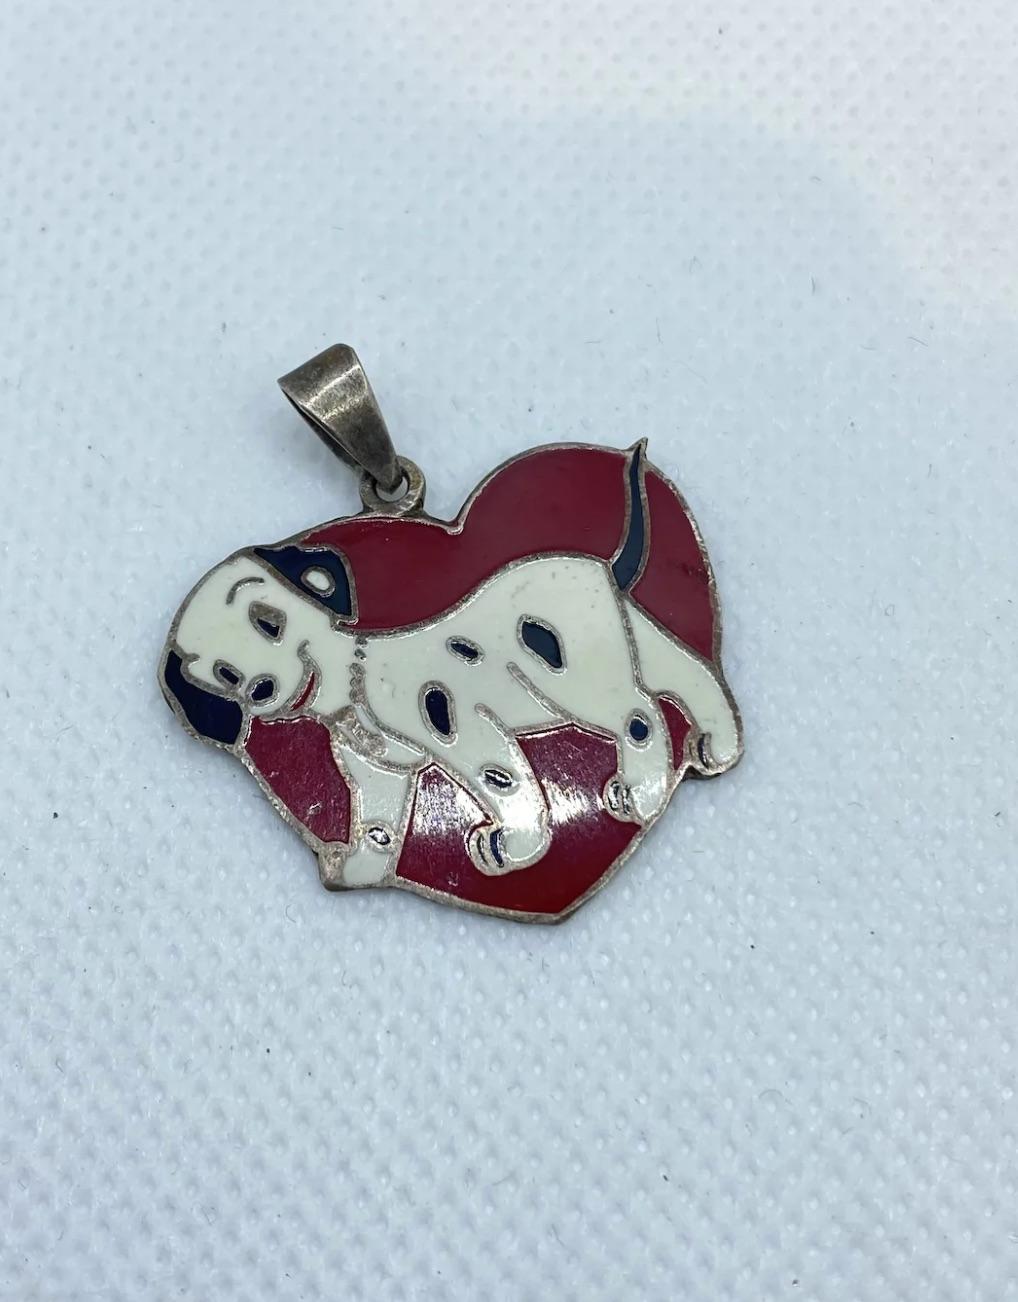 Sterling Silver Enamel Mexico Dalmatian Dog Pendant Charm
some minor nicks to the enamel please photos for details .
some minor scratches
size is approximately 1 1/2 inches from top to bottom and 1 inches wide

Due to the item's age do not expect